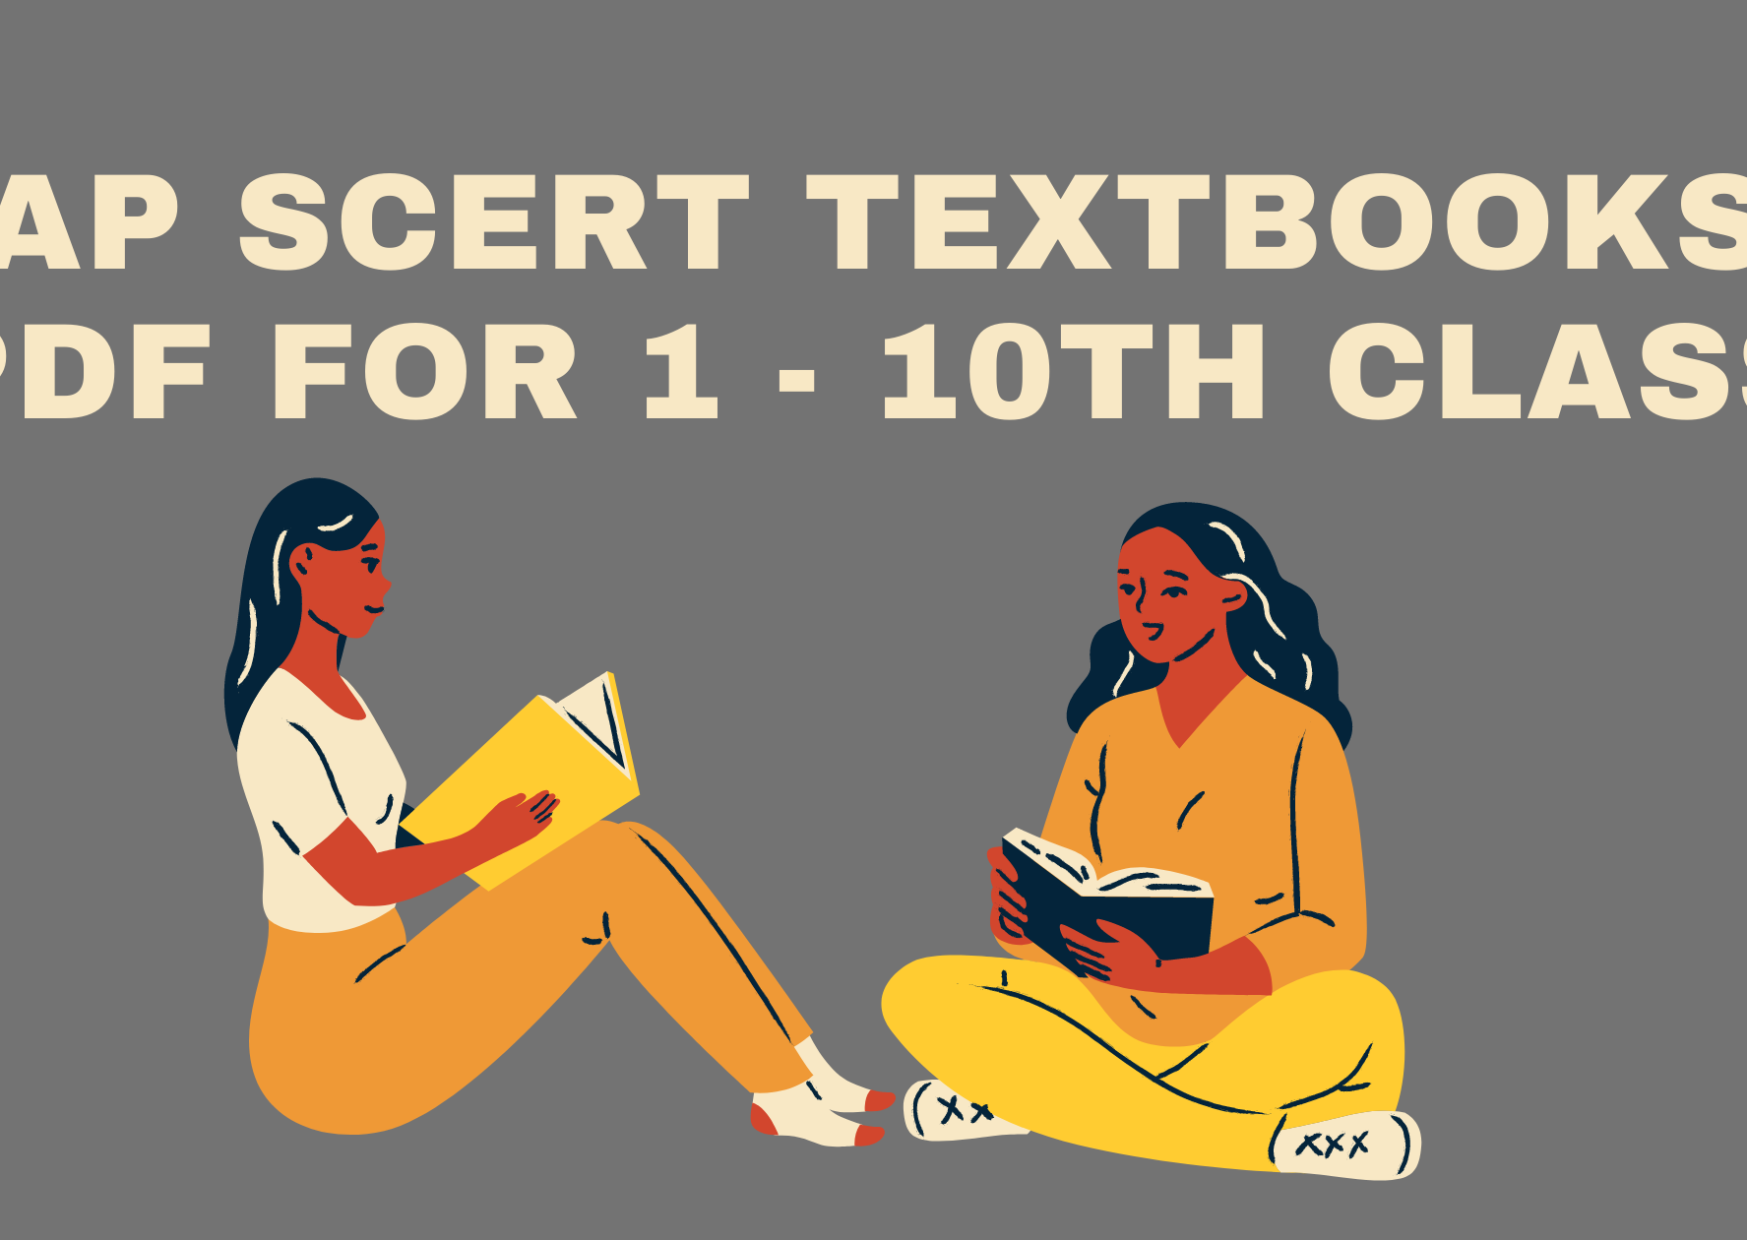 AP SCERT Textbooks PDF for 1 - 10th Class 2022 Download